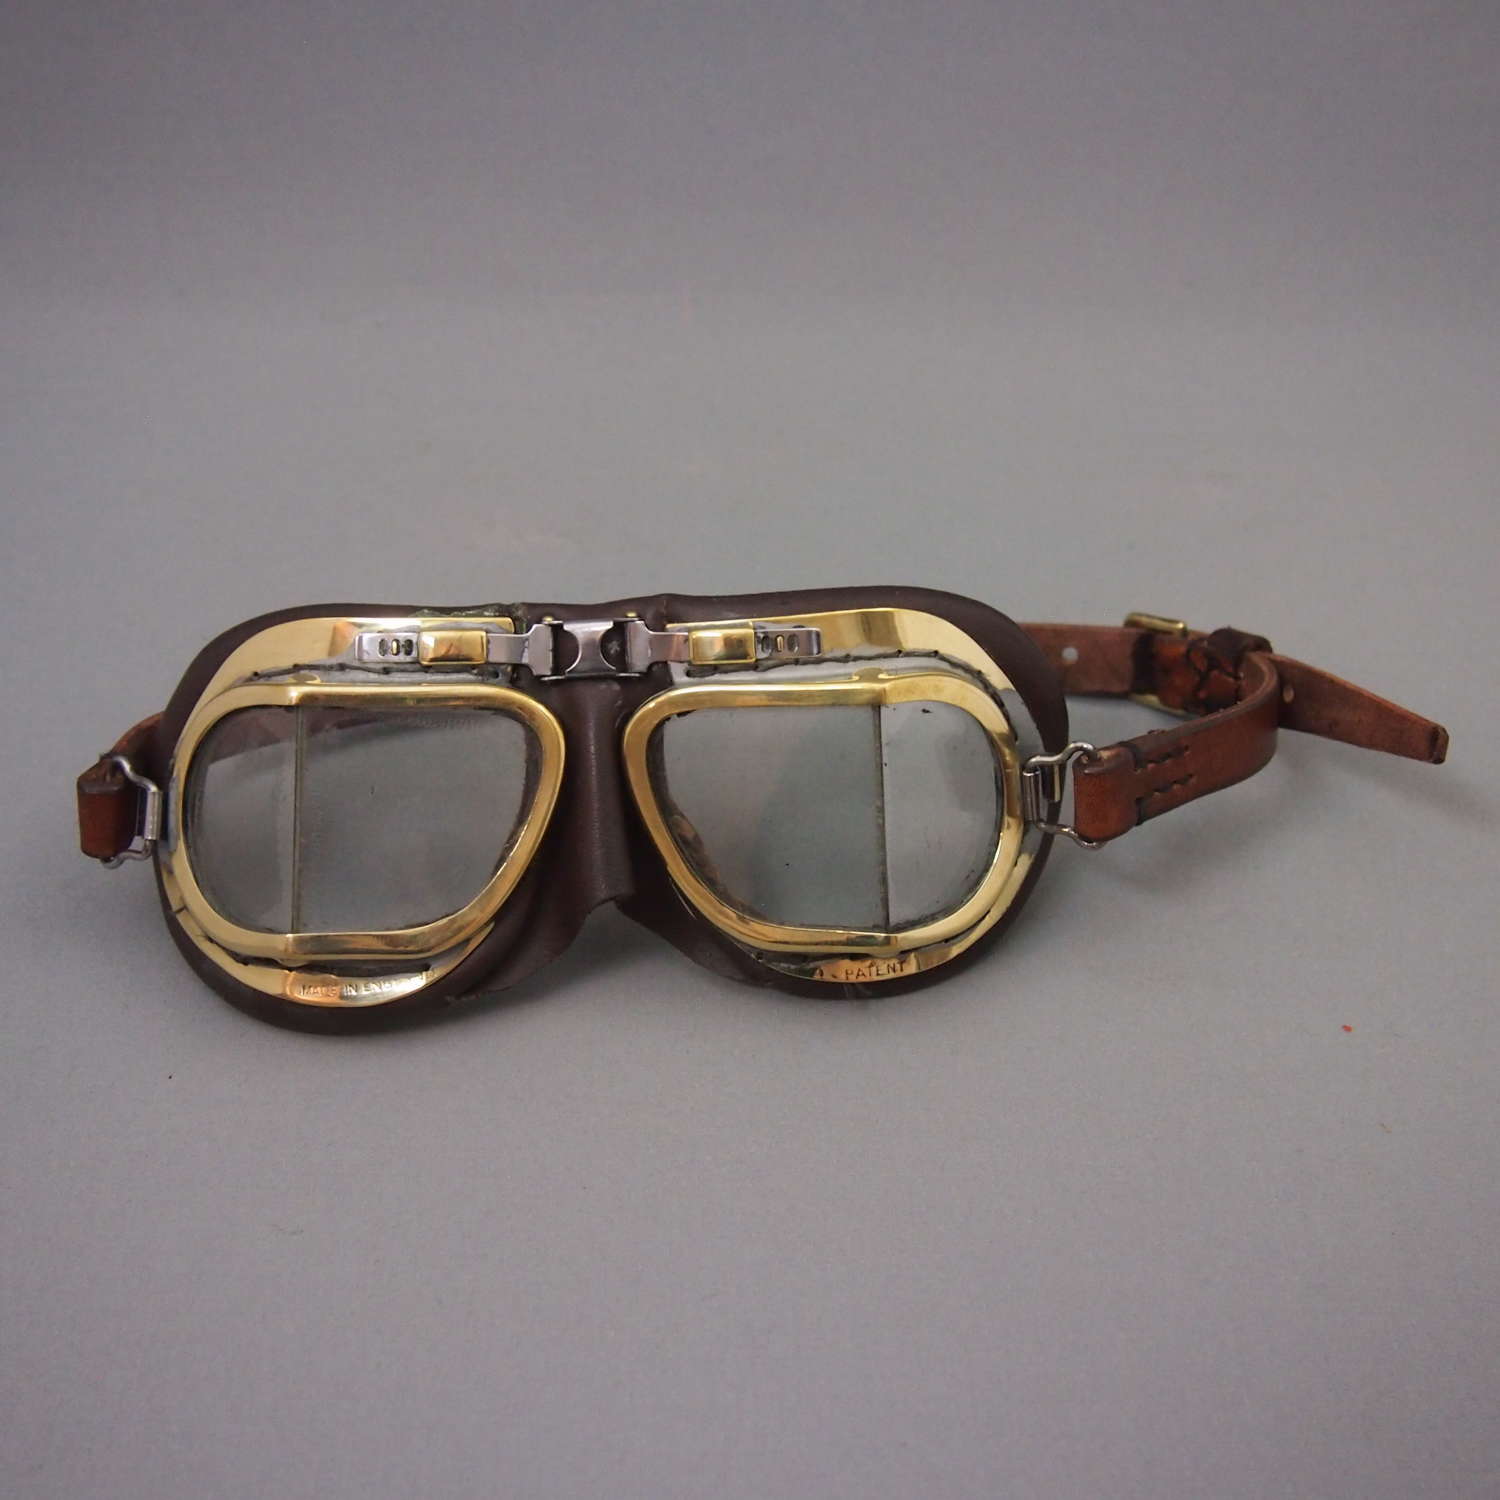 Vintage Driving Goggles C1930s. W8484